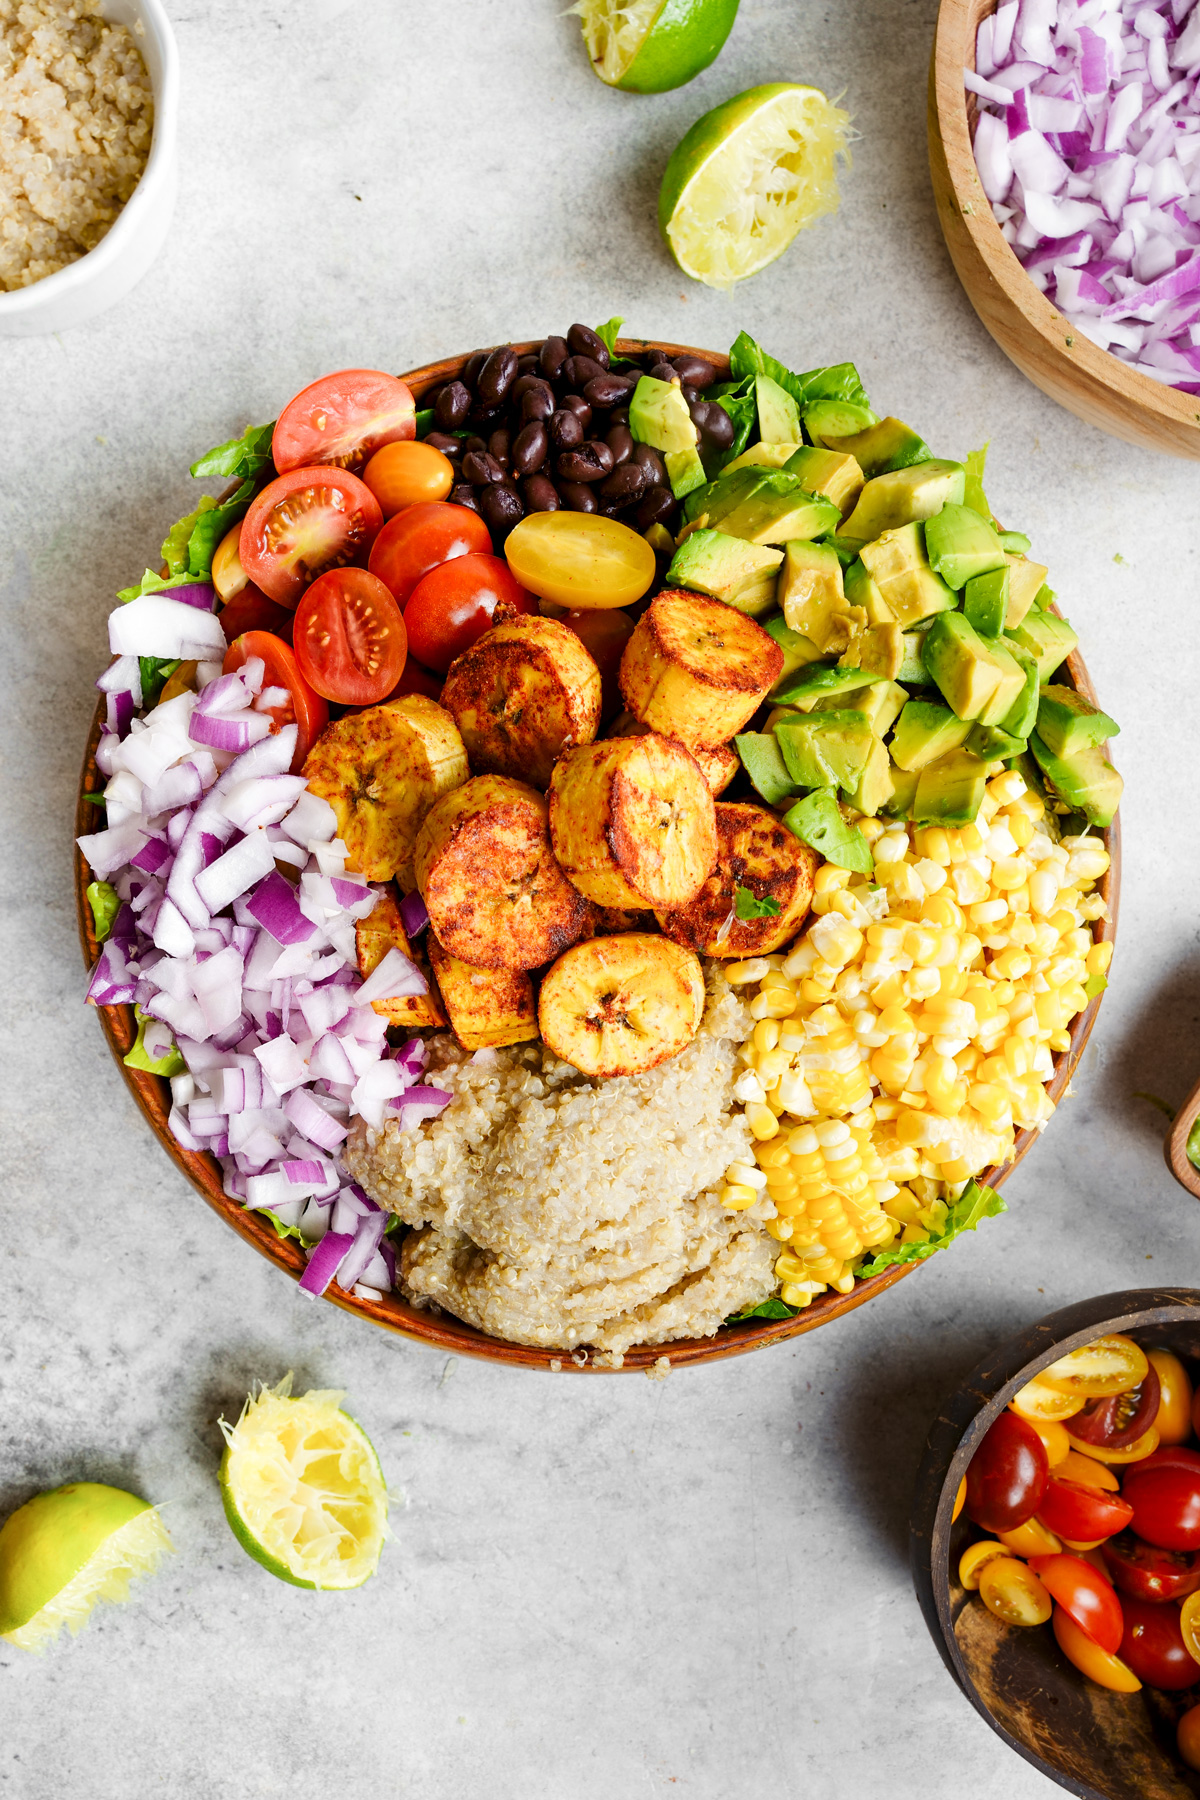 the bowl of plantain salad un-tossed to show all the individual vegetables